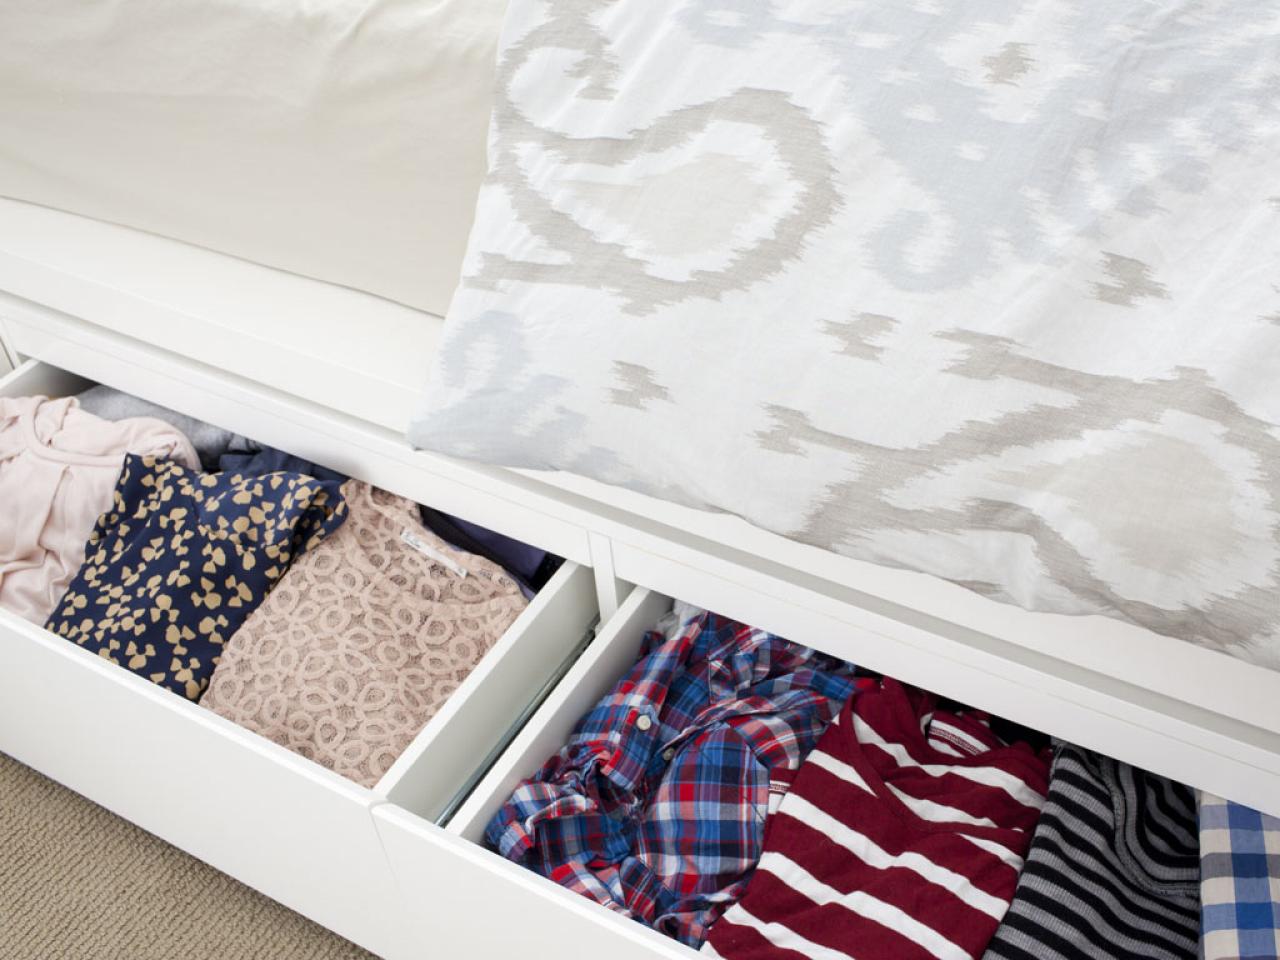 10 Ways To Maximize Under The Bed Storage Hgtv,What Color Matches Green Walls